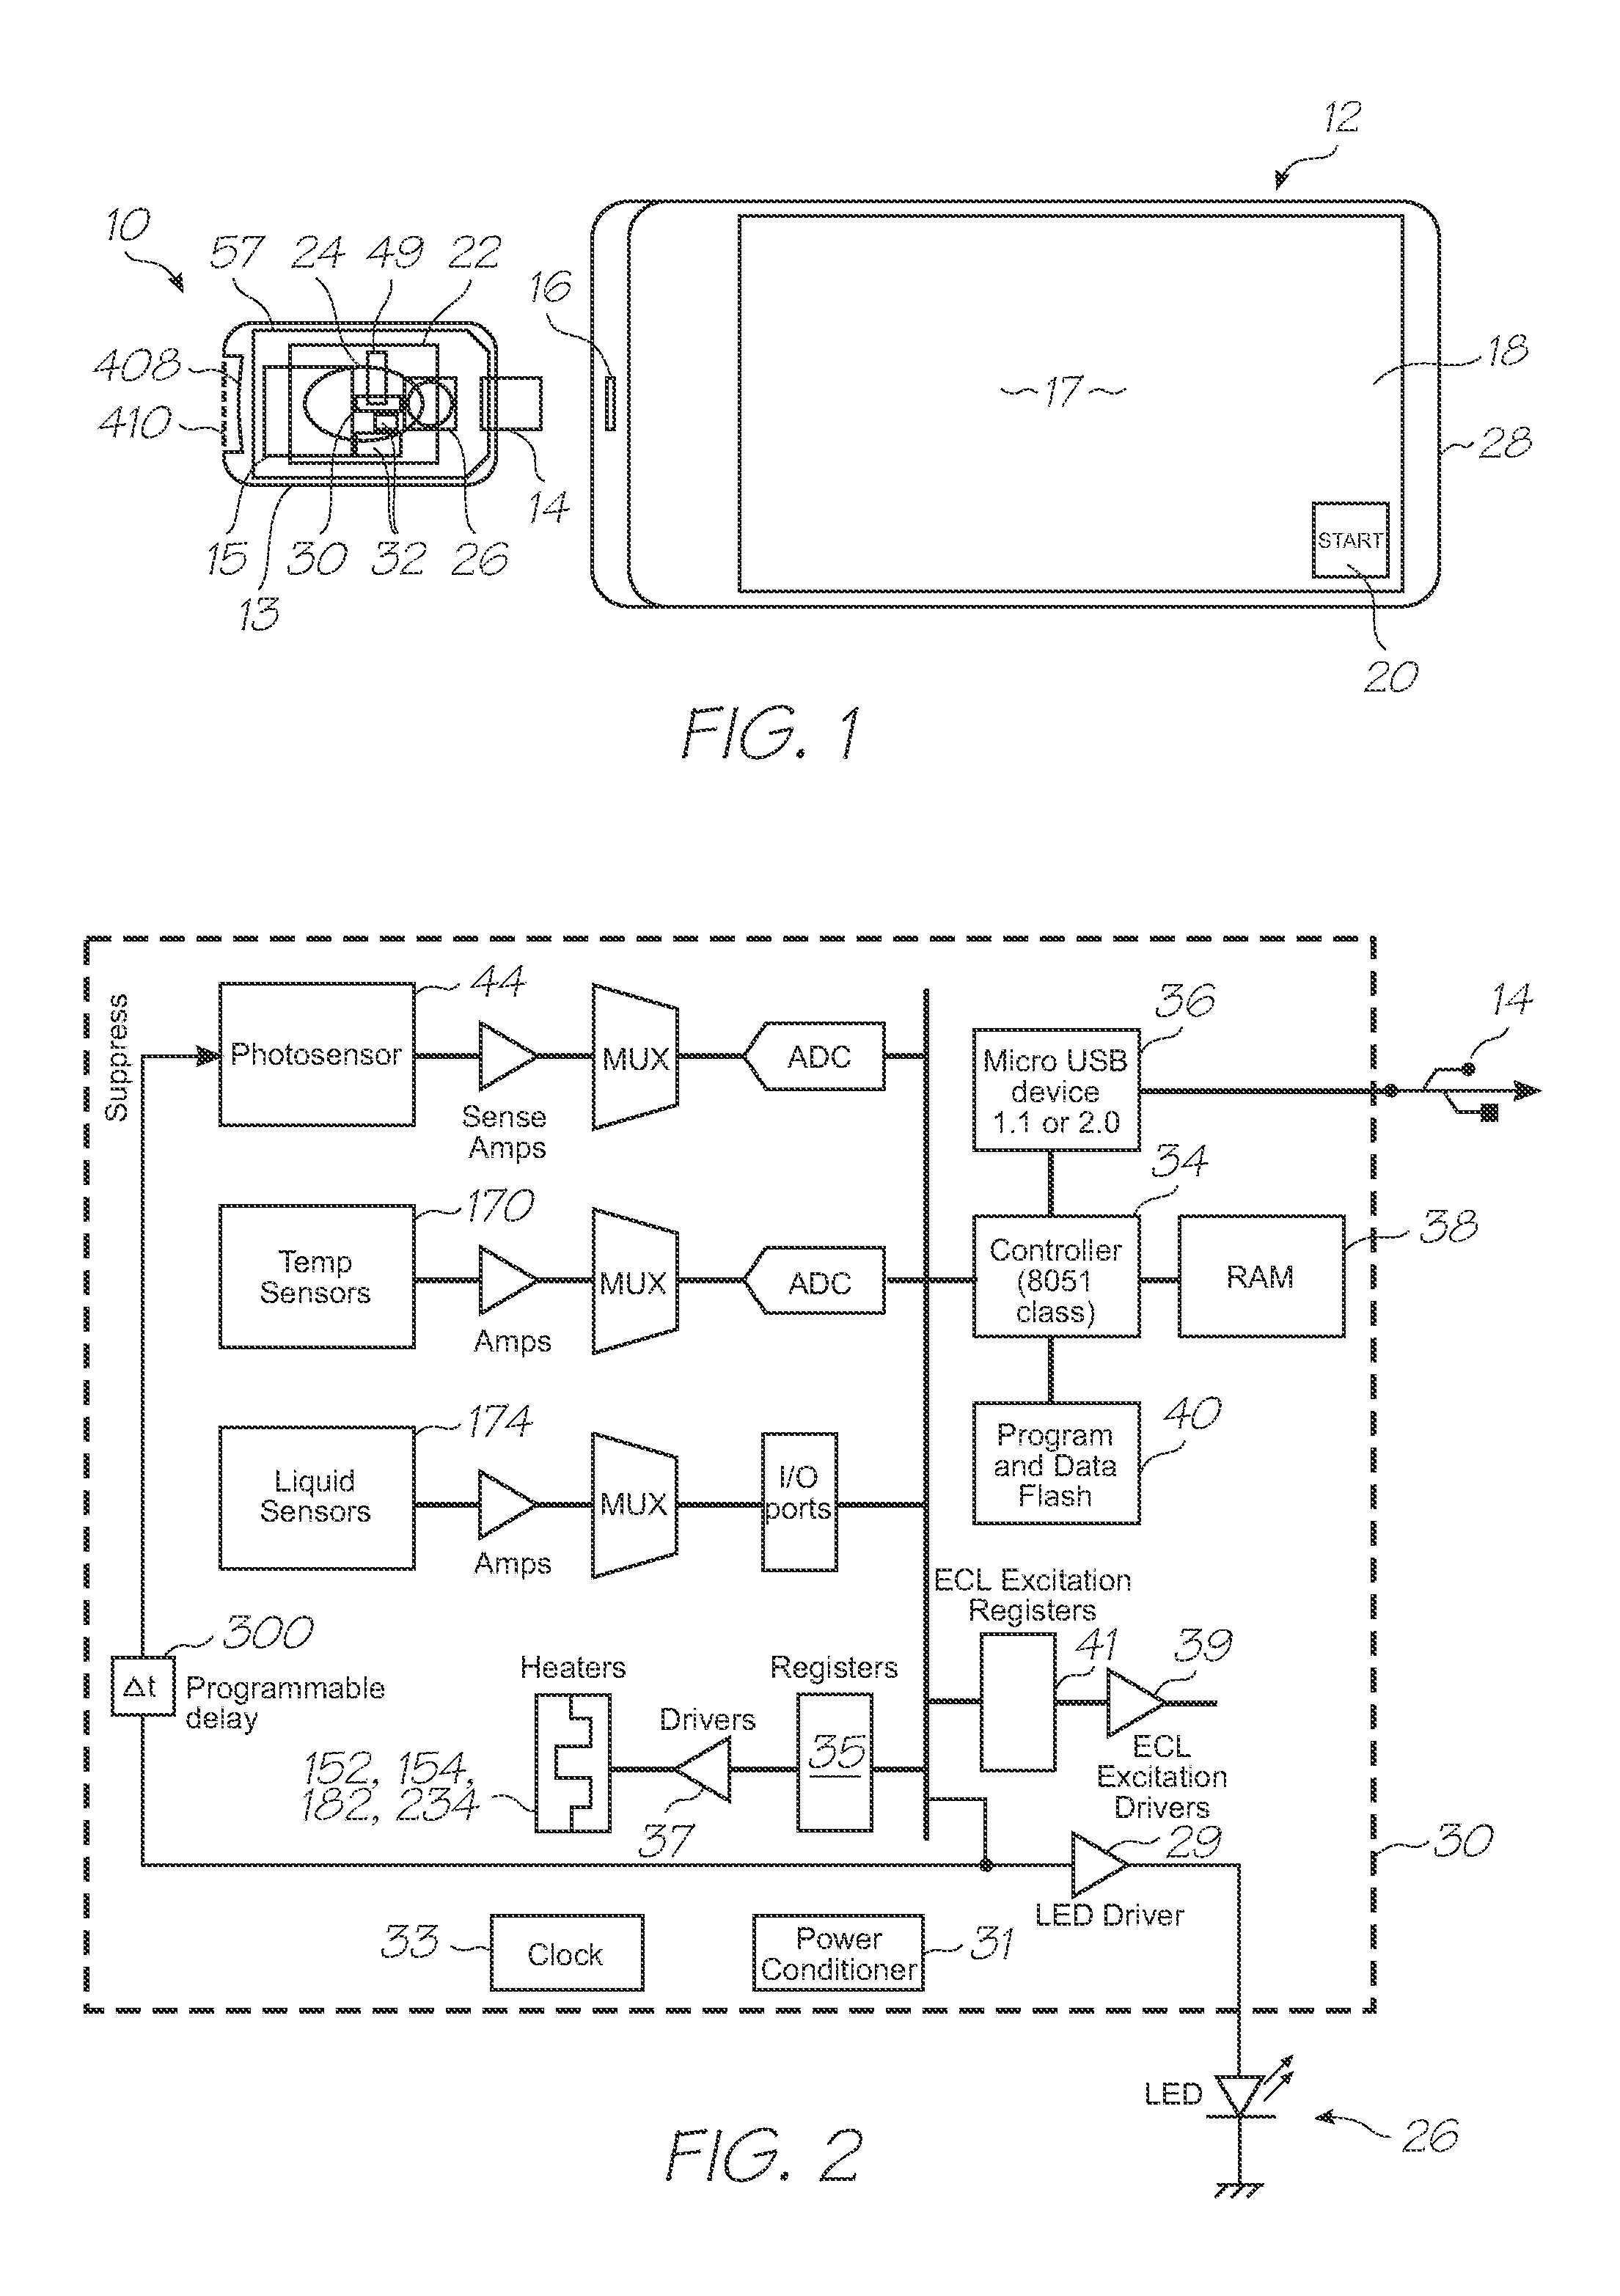 Microfluidic device with thermal bend actuated pressure pulse valve